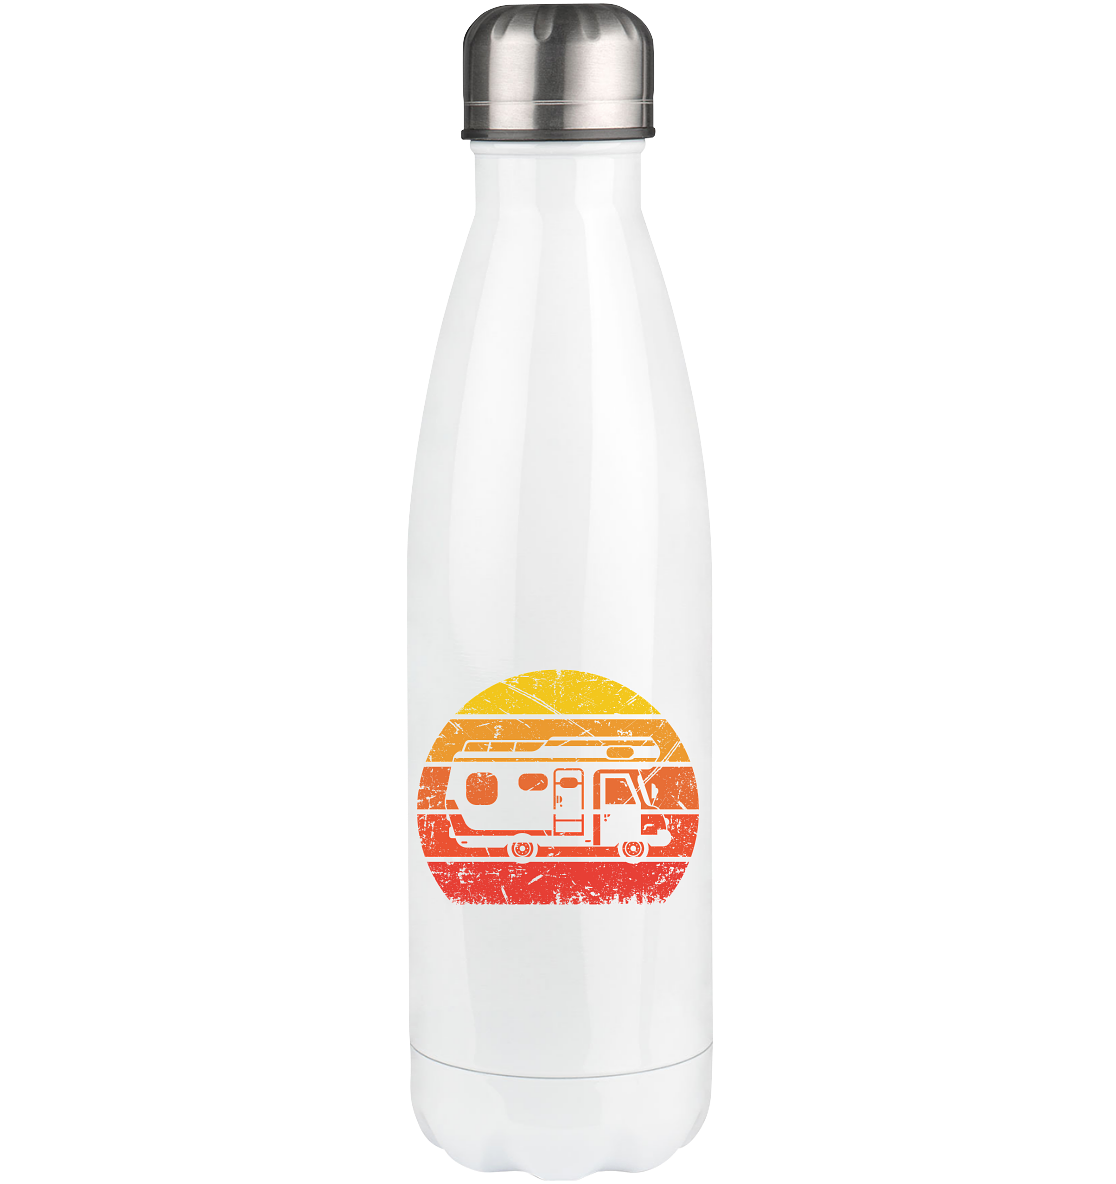 Vintage Sun and Camping - Edelstahl Thermosflasche camping UONP 500ml